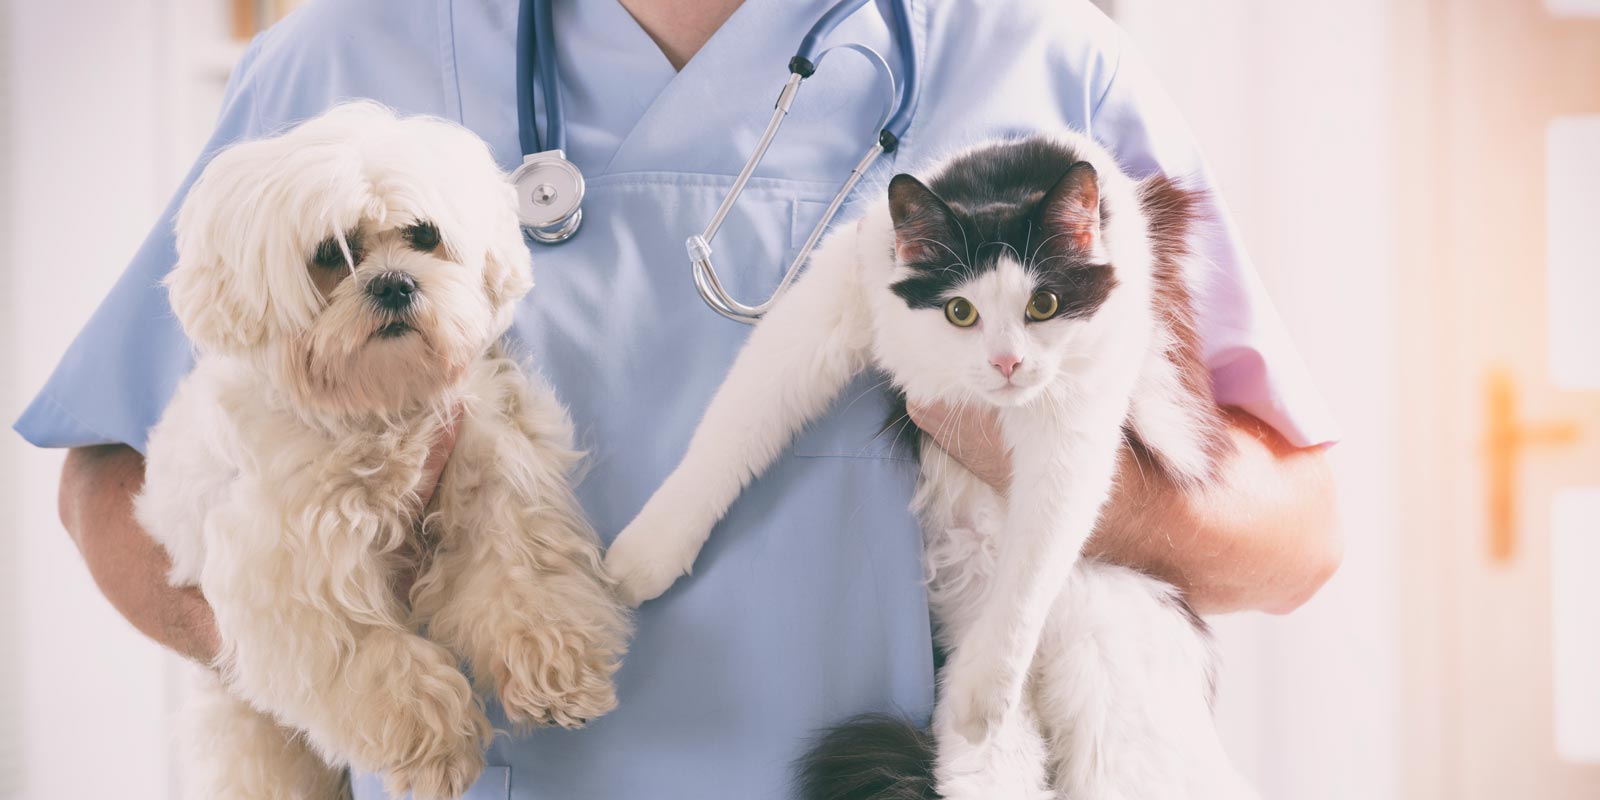 About Valley Animal Hospital - Valley Animal Hospital